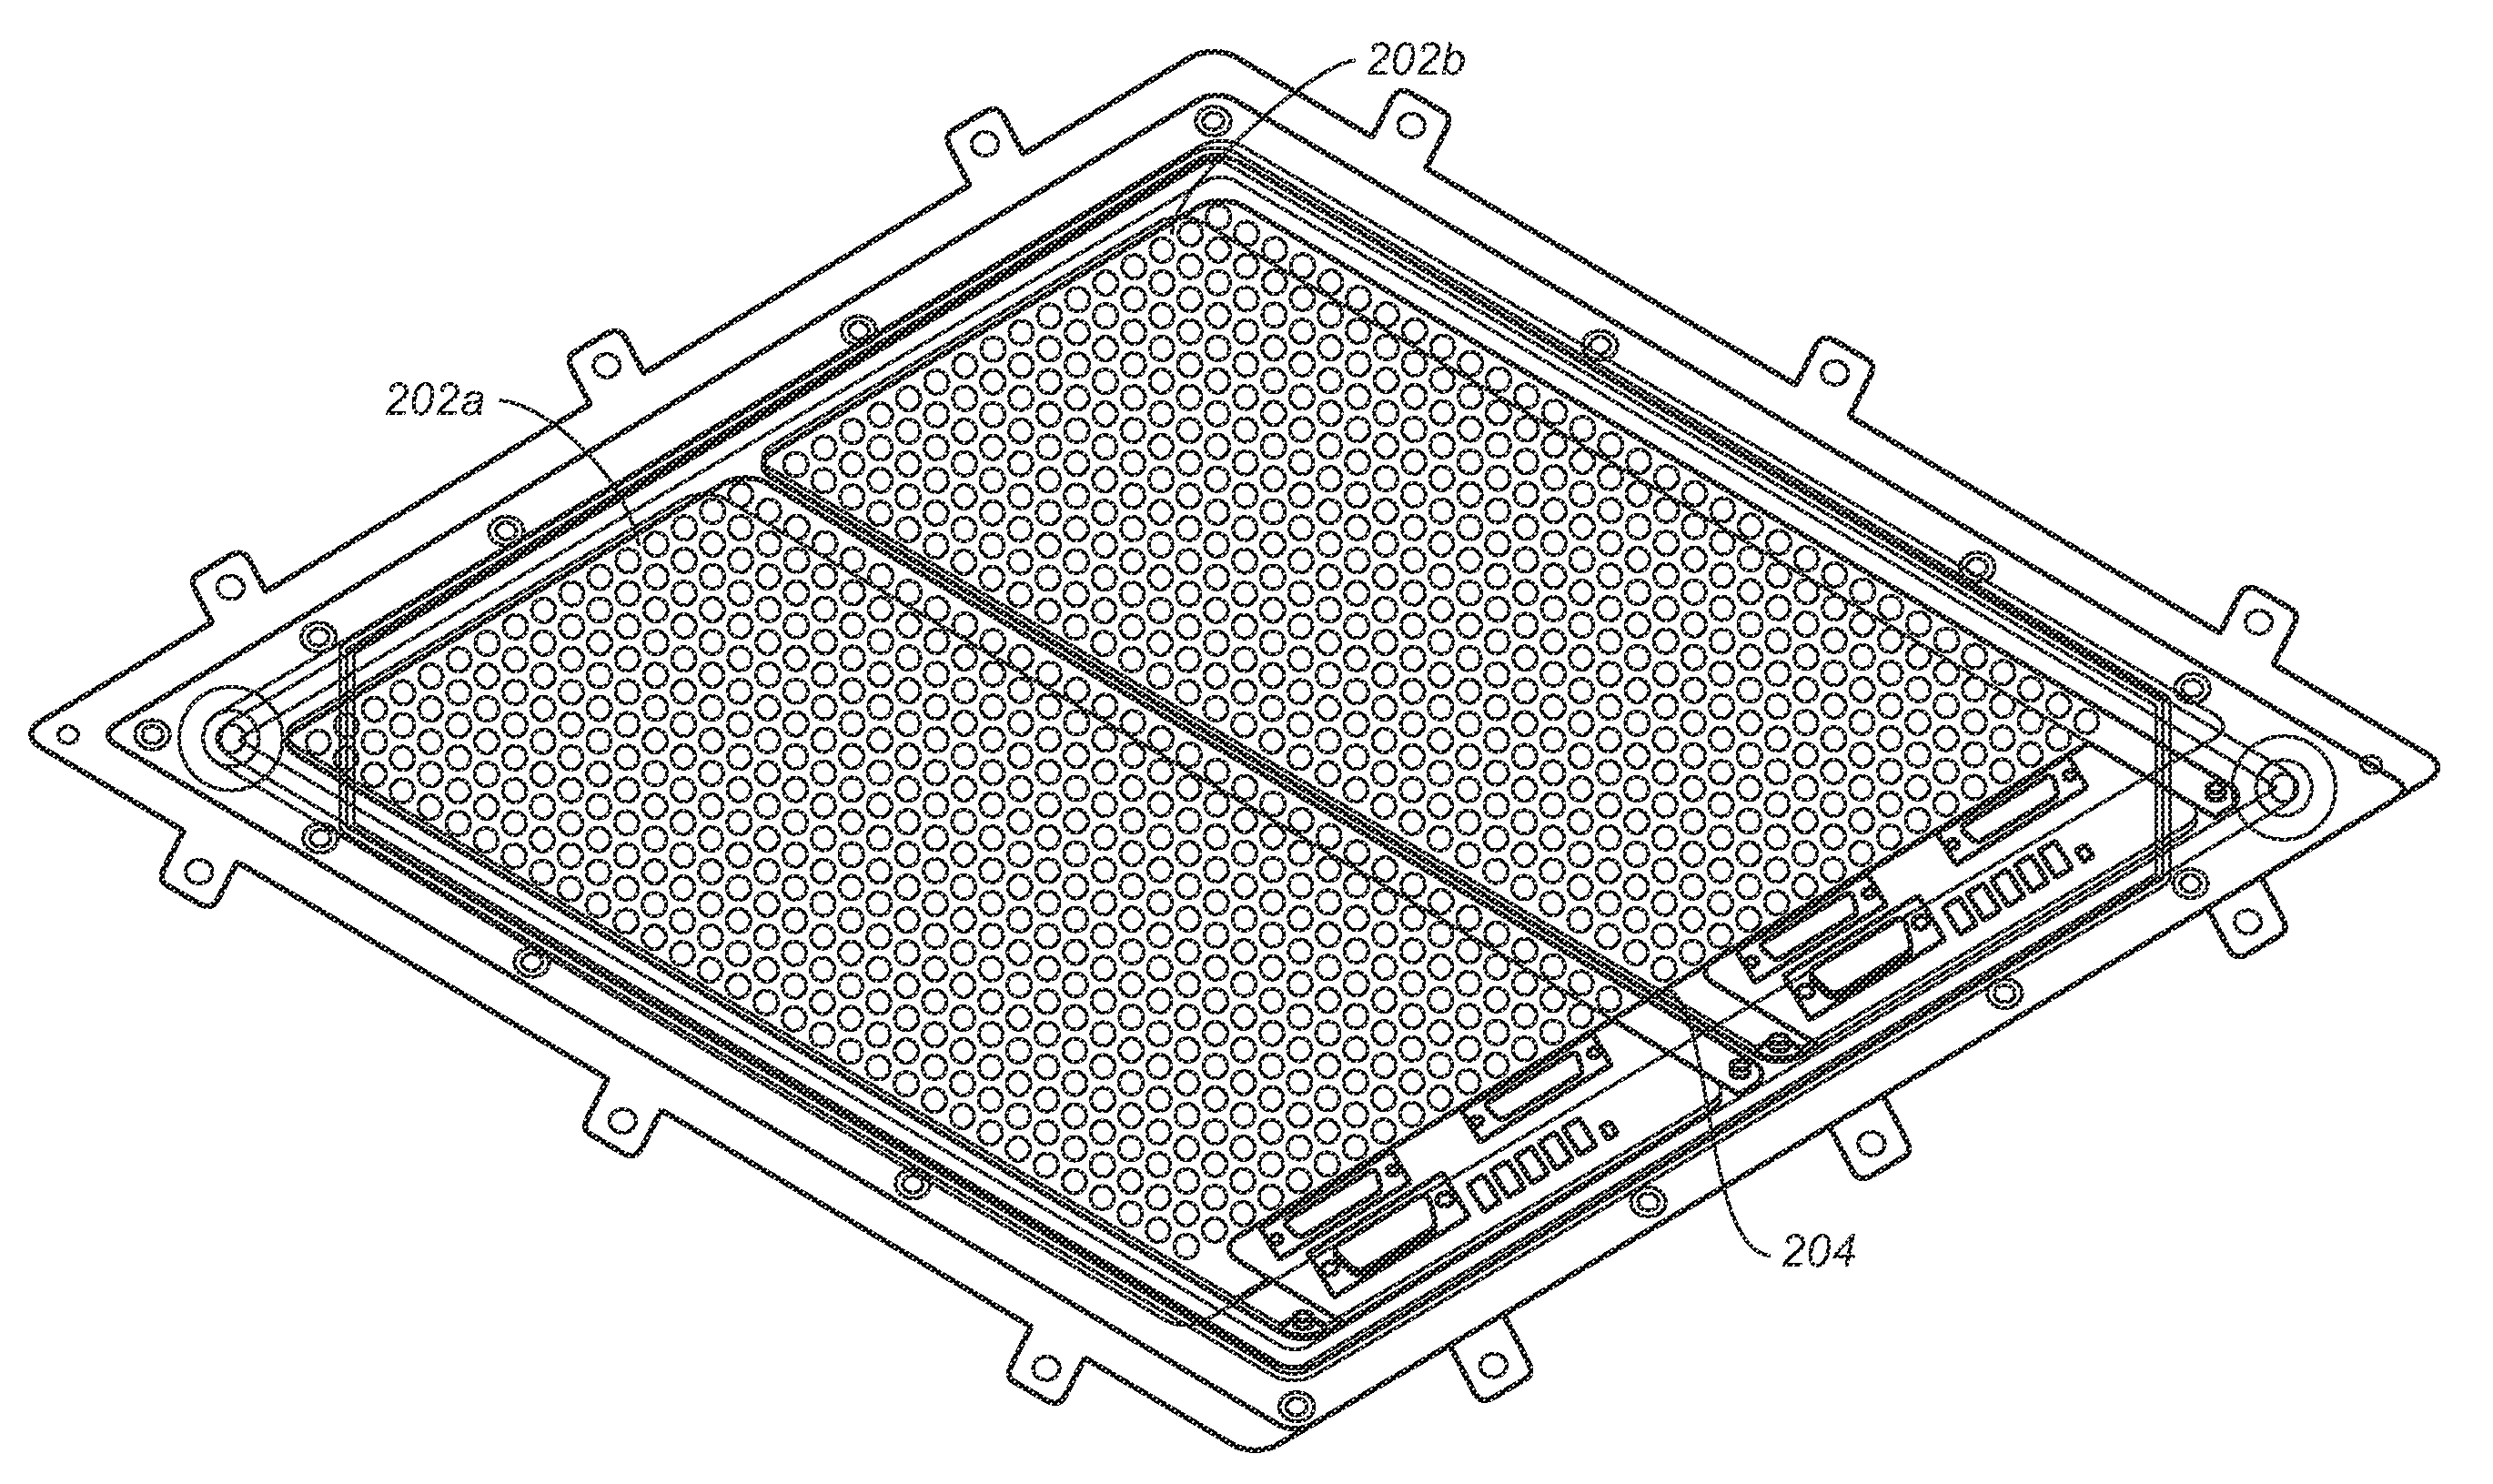 Phased array antenna system utilizing a beam forming network